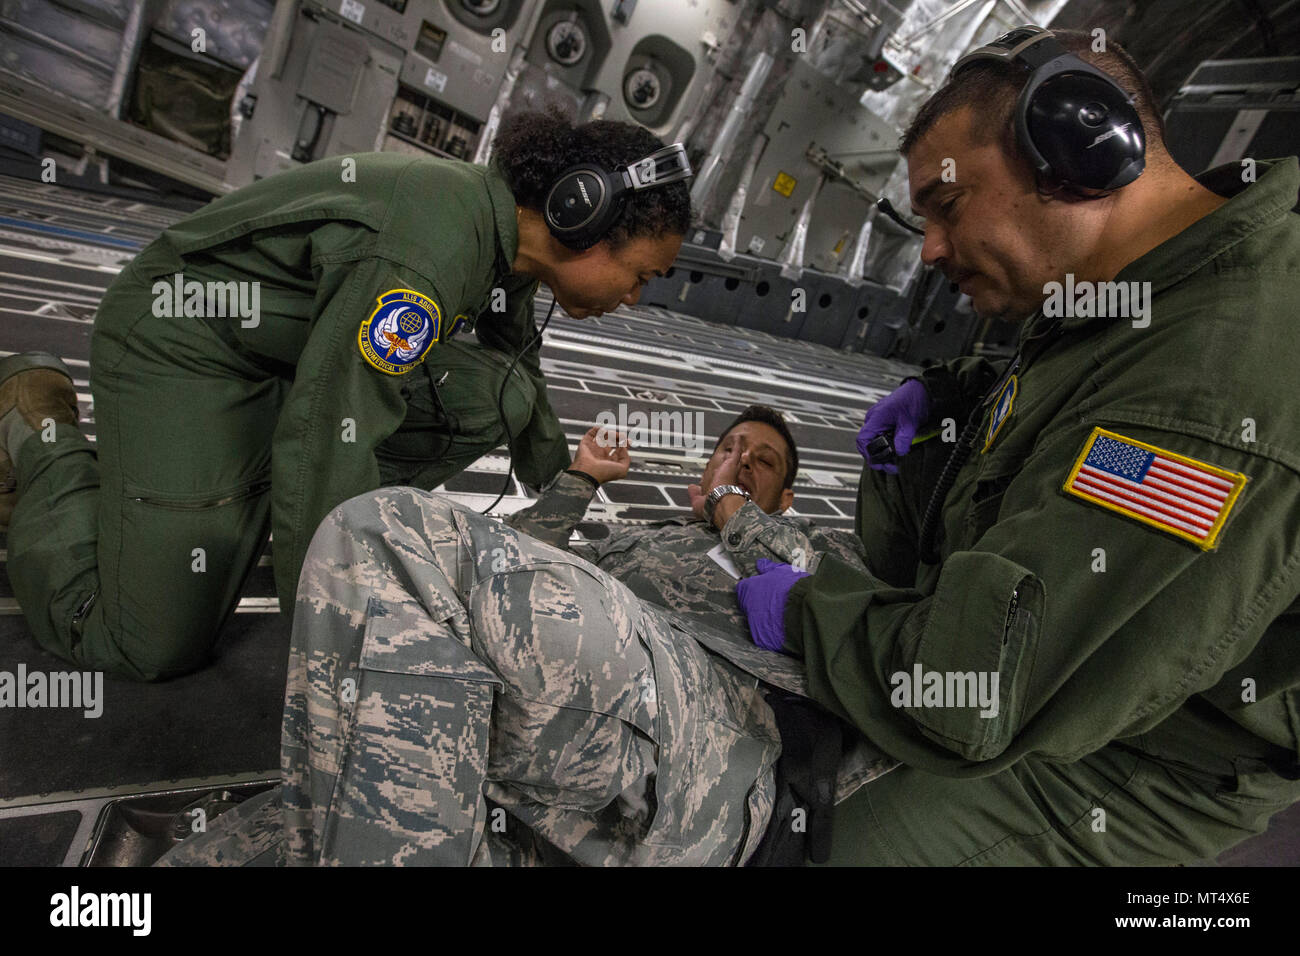 U.S. Air Force Master Sgt. Linda W. Daniels, left, and Master Sgt. Louis J. Muzyka, right, both aeromedical evacuation technicians, assist simulated psychiatric outpatient Staff Sgt. Edward Guillen, all with the 514th Aeromedical Evacuation Squadron, 514th Air Mobility Wing, during an aeromedical evacuation training mission onboard a 305th Air Mobility Wing C-17 Globemaster III to Nashville, Tenn., July 29, 2017. The training’s purpose is to teach flight nurses and aeromedical evacuation technicians how to respond to scenarios during the evacuation of sick or wounded personnel, and how to hand Stock Photo